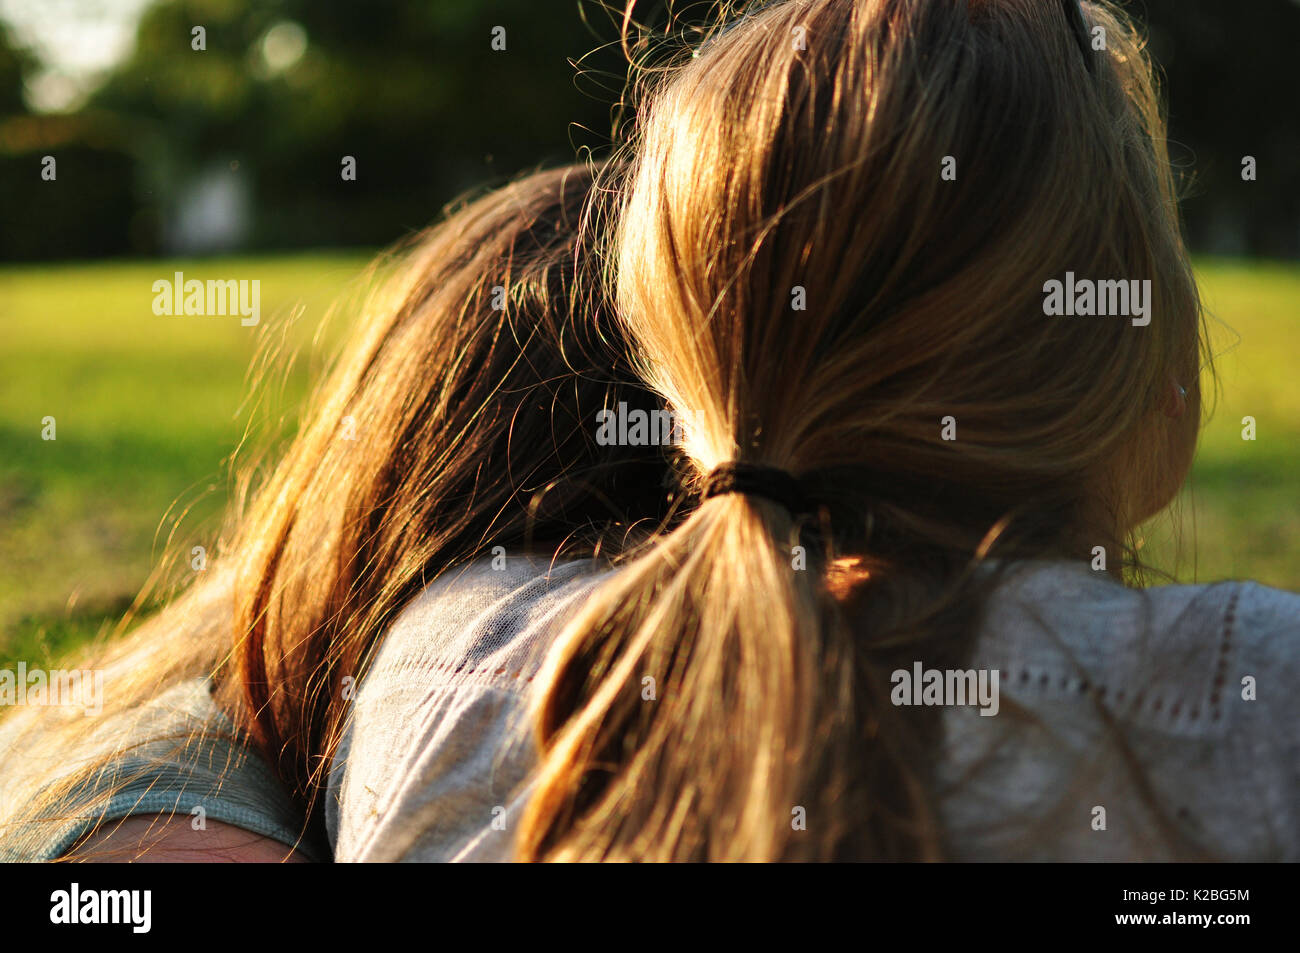 Amorous couple from behind Stock Photo